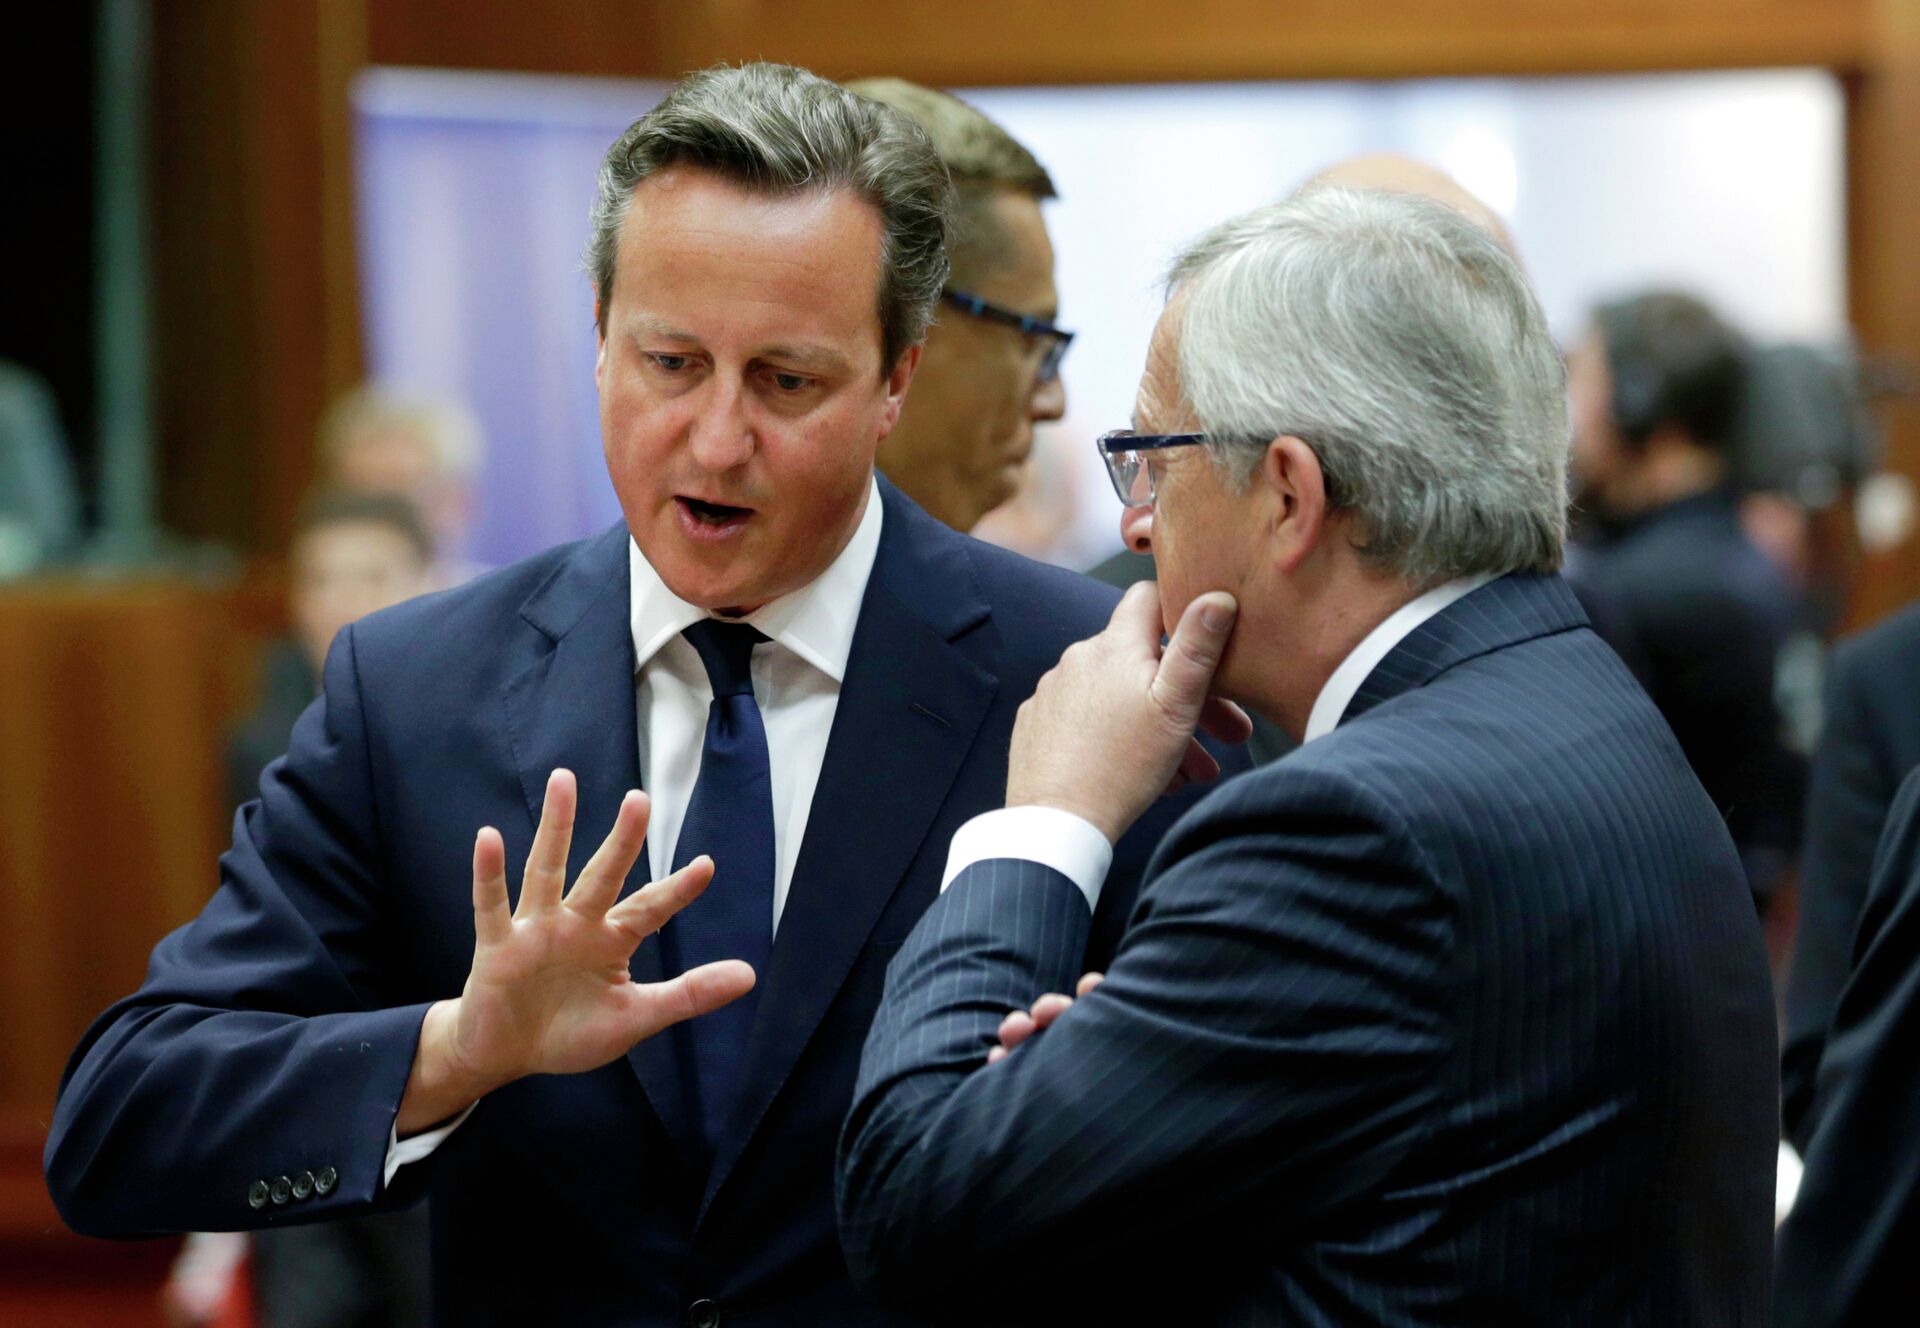 'They Asked Me to Shut Up': Juncker Claims Cameron Told Him Not to Interfere in UK's Brexit Debate - Sputnik International, 1920, 19.04.2021